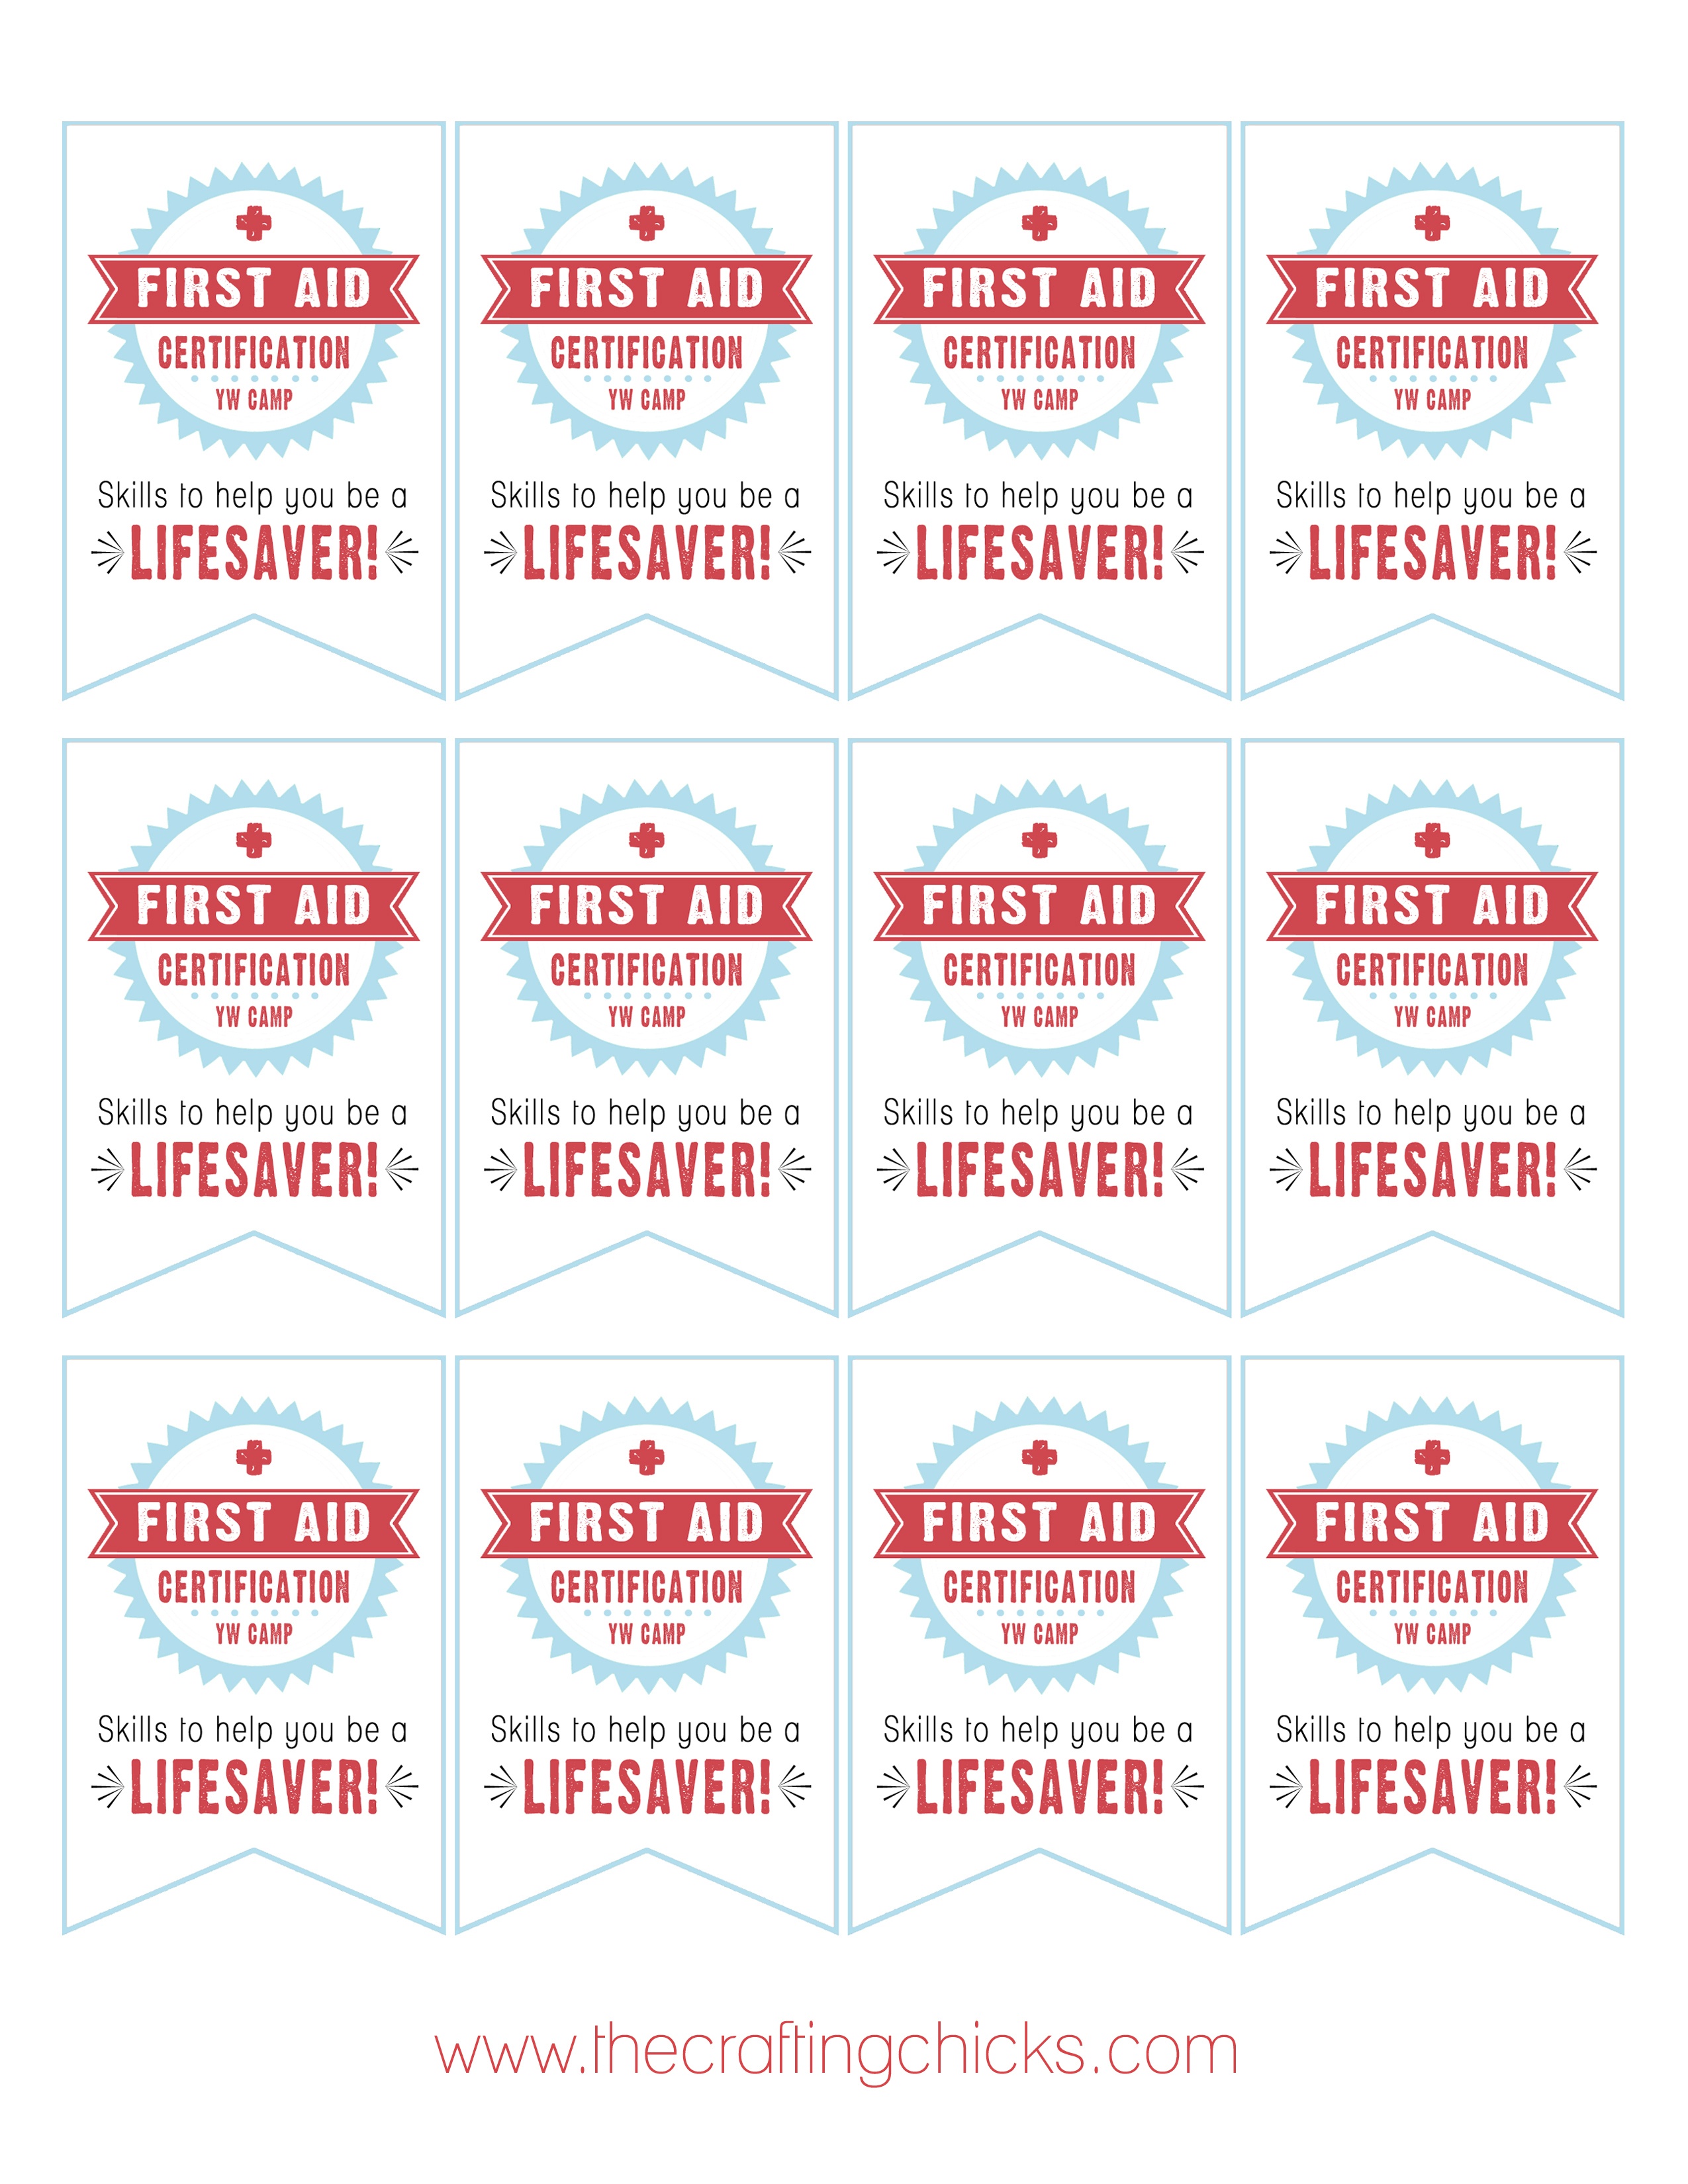 First Aid Certification Handouts {Free Printable For Yw Camp} - Free Printable Lifesaver Tags